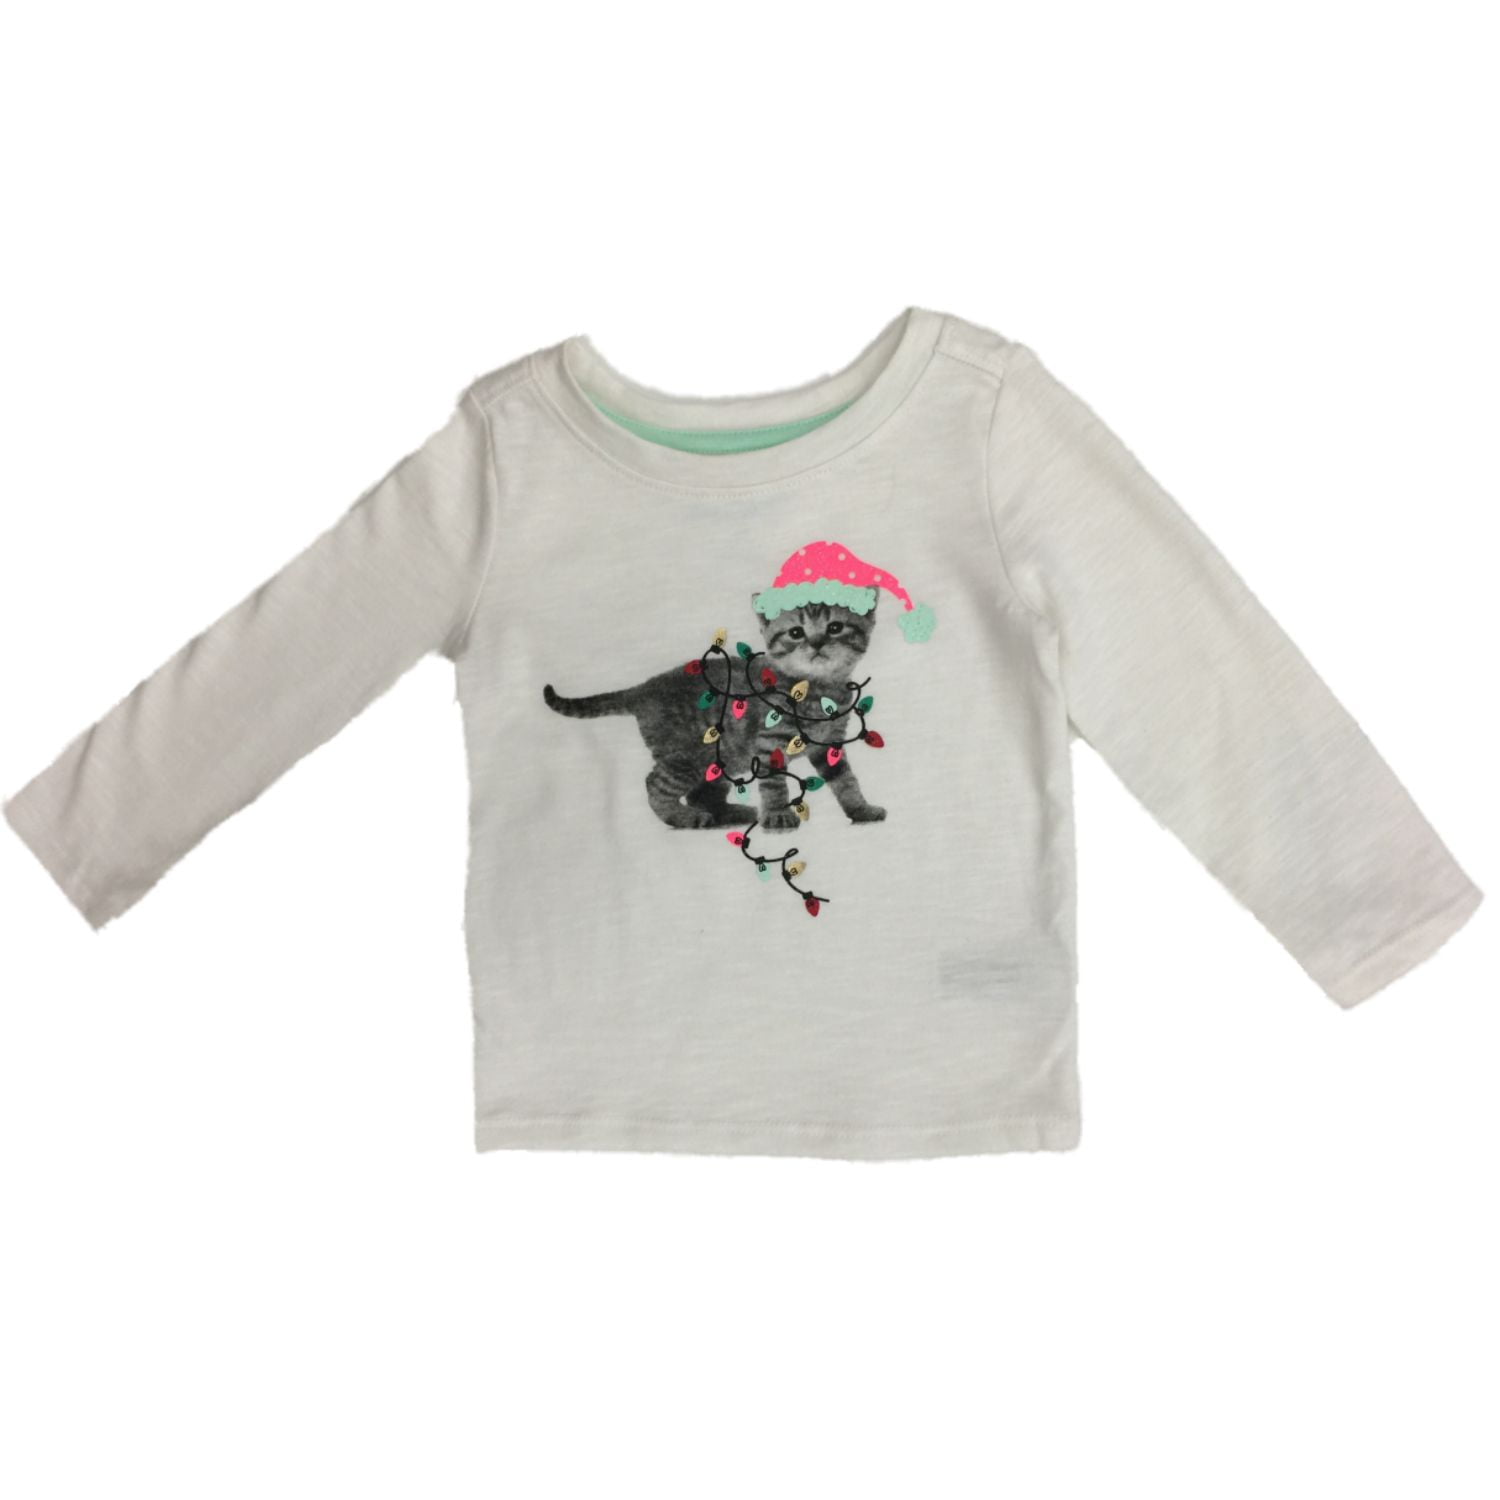 2 Cat & Jack Toddler Girl's Size 18 Months Long Sleeve T-Shirts Red Glitter 